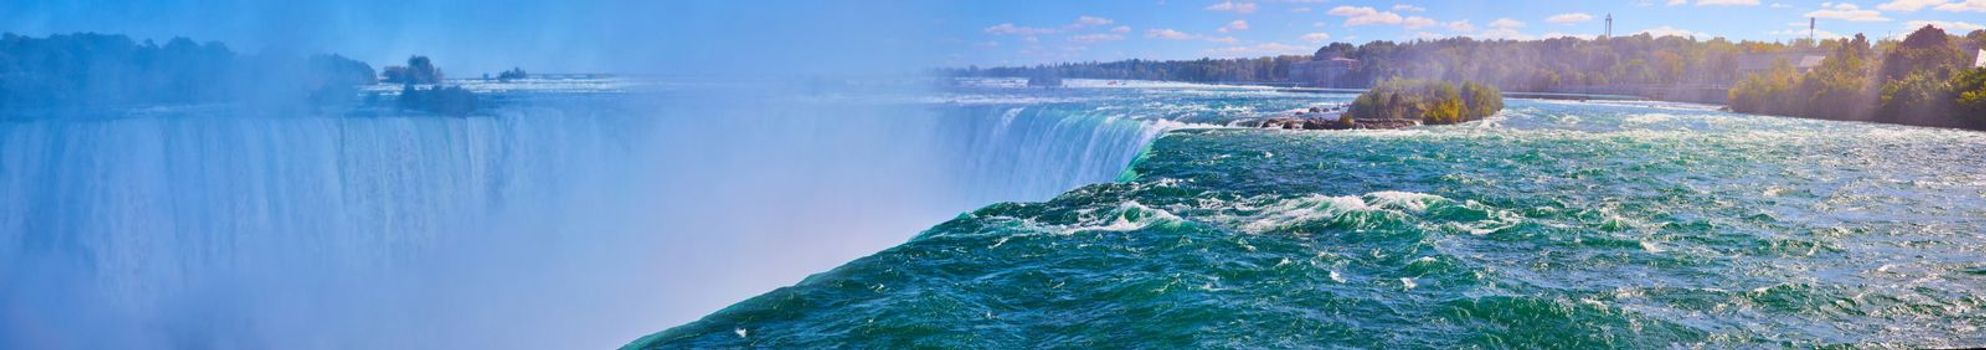 Image of Wide panoramic view of Horseshoe Falls up close on edge with misty falls in Niagara Falls